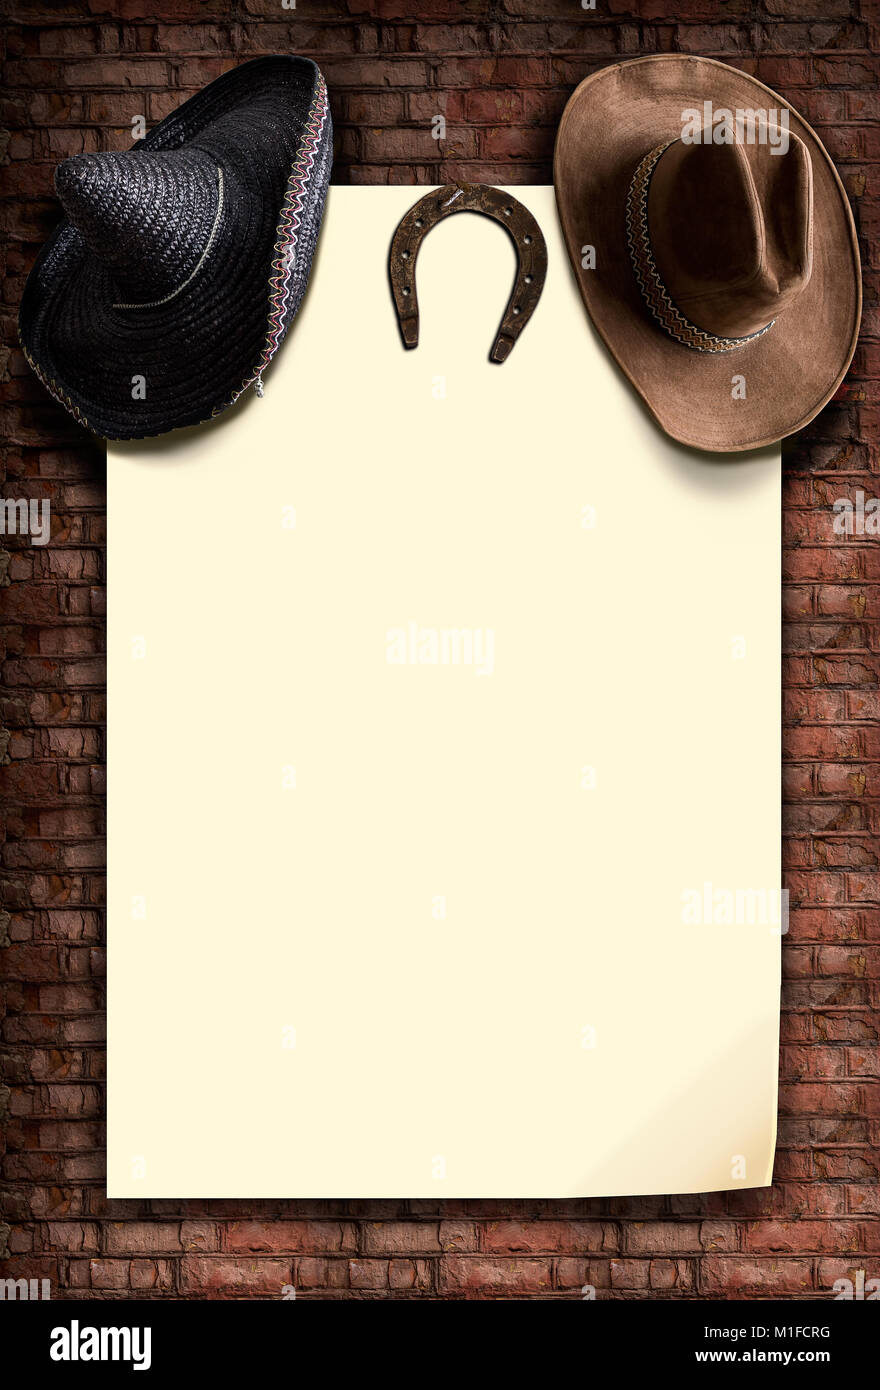 cowboy and mexican hats Stock Photo